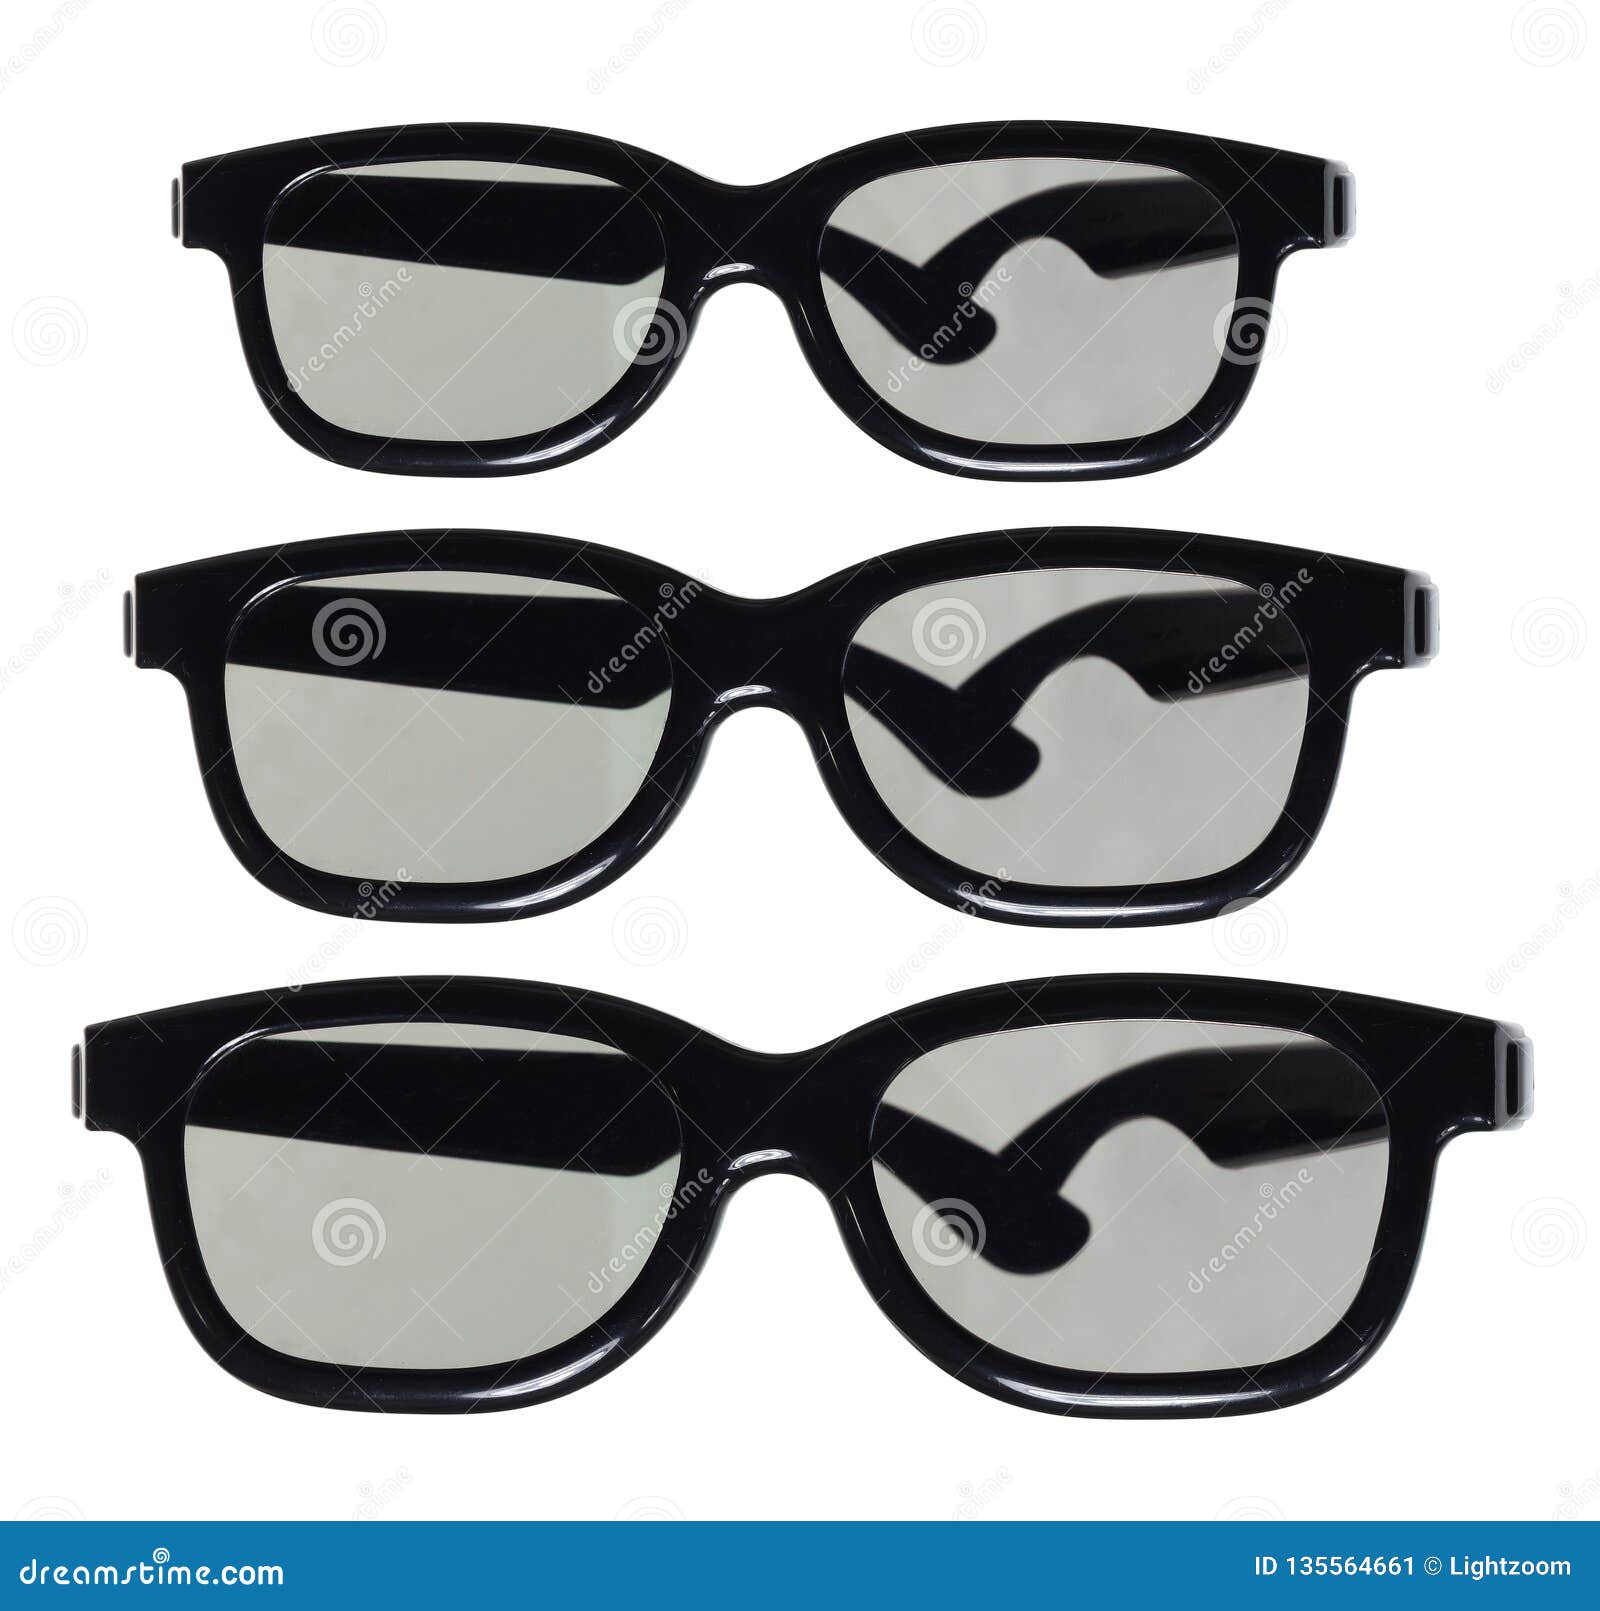 3D Glasses stock image. Image of vision, isolated, shot - 135564661